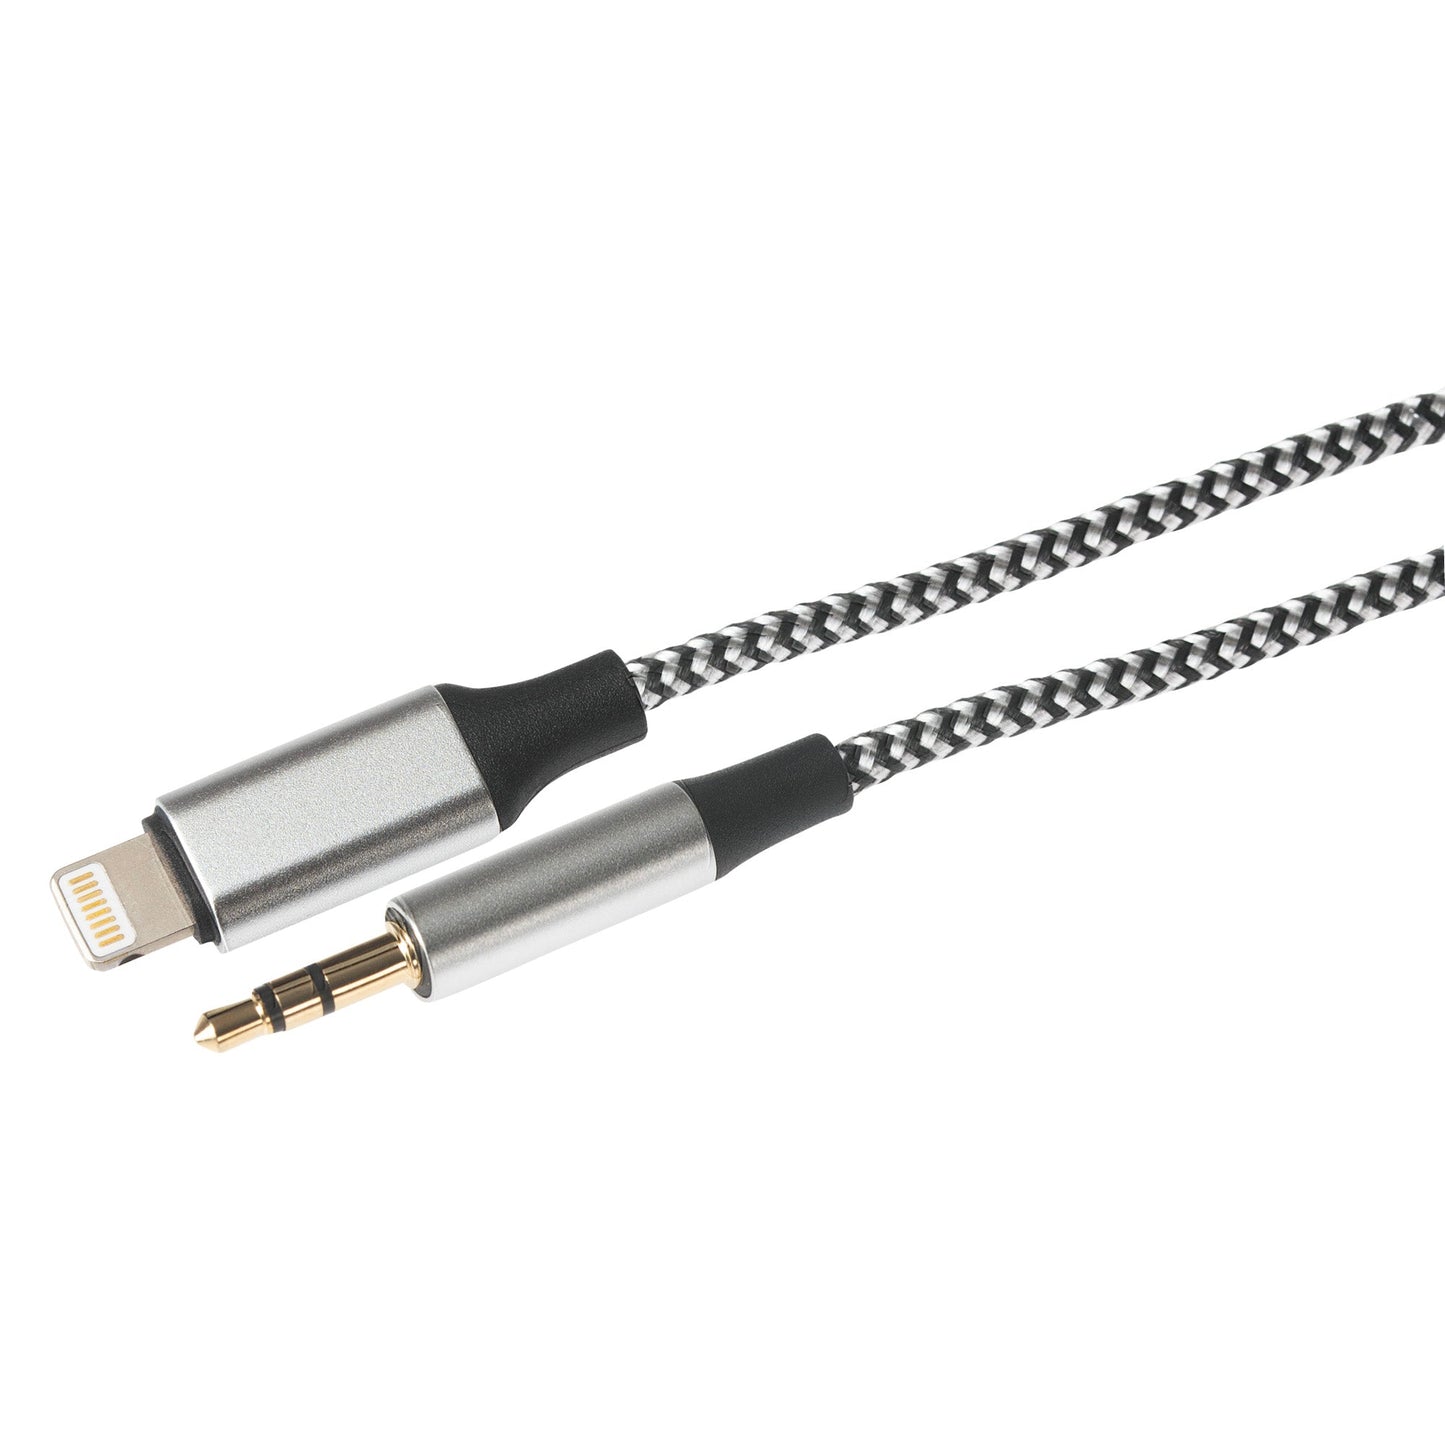 Maplin Lightning to 3.5mm Aux Stereo 3 Pole Jack Plug Braided Cable - Silver, 1m - maplin.co.uk